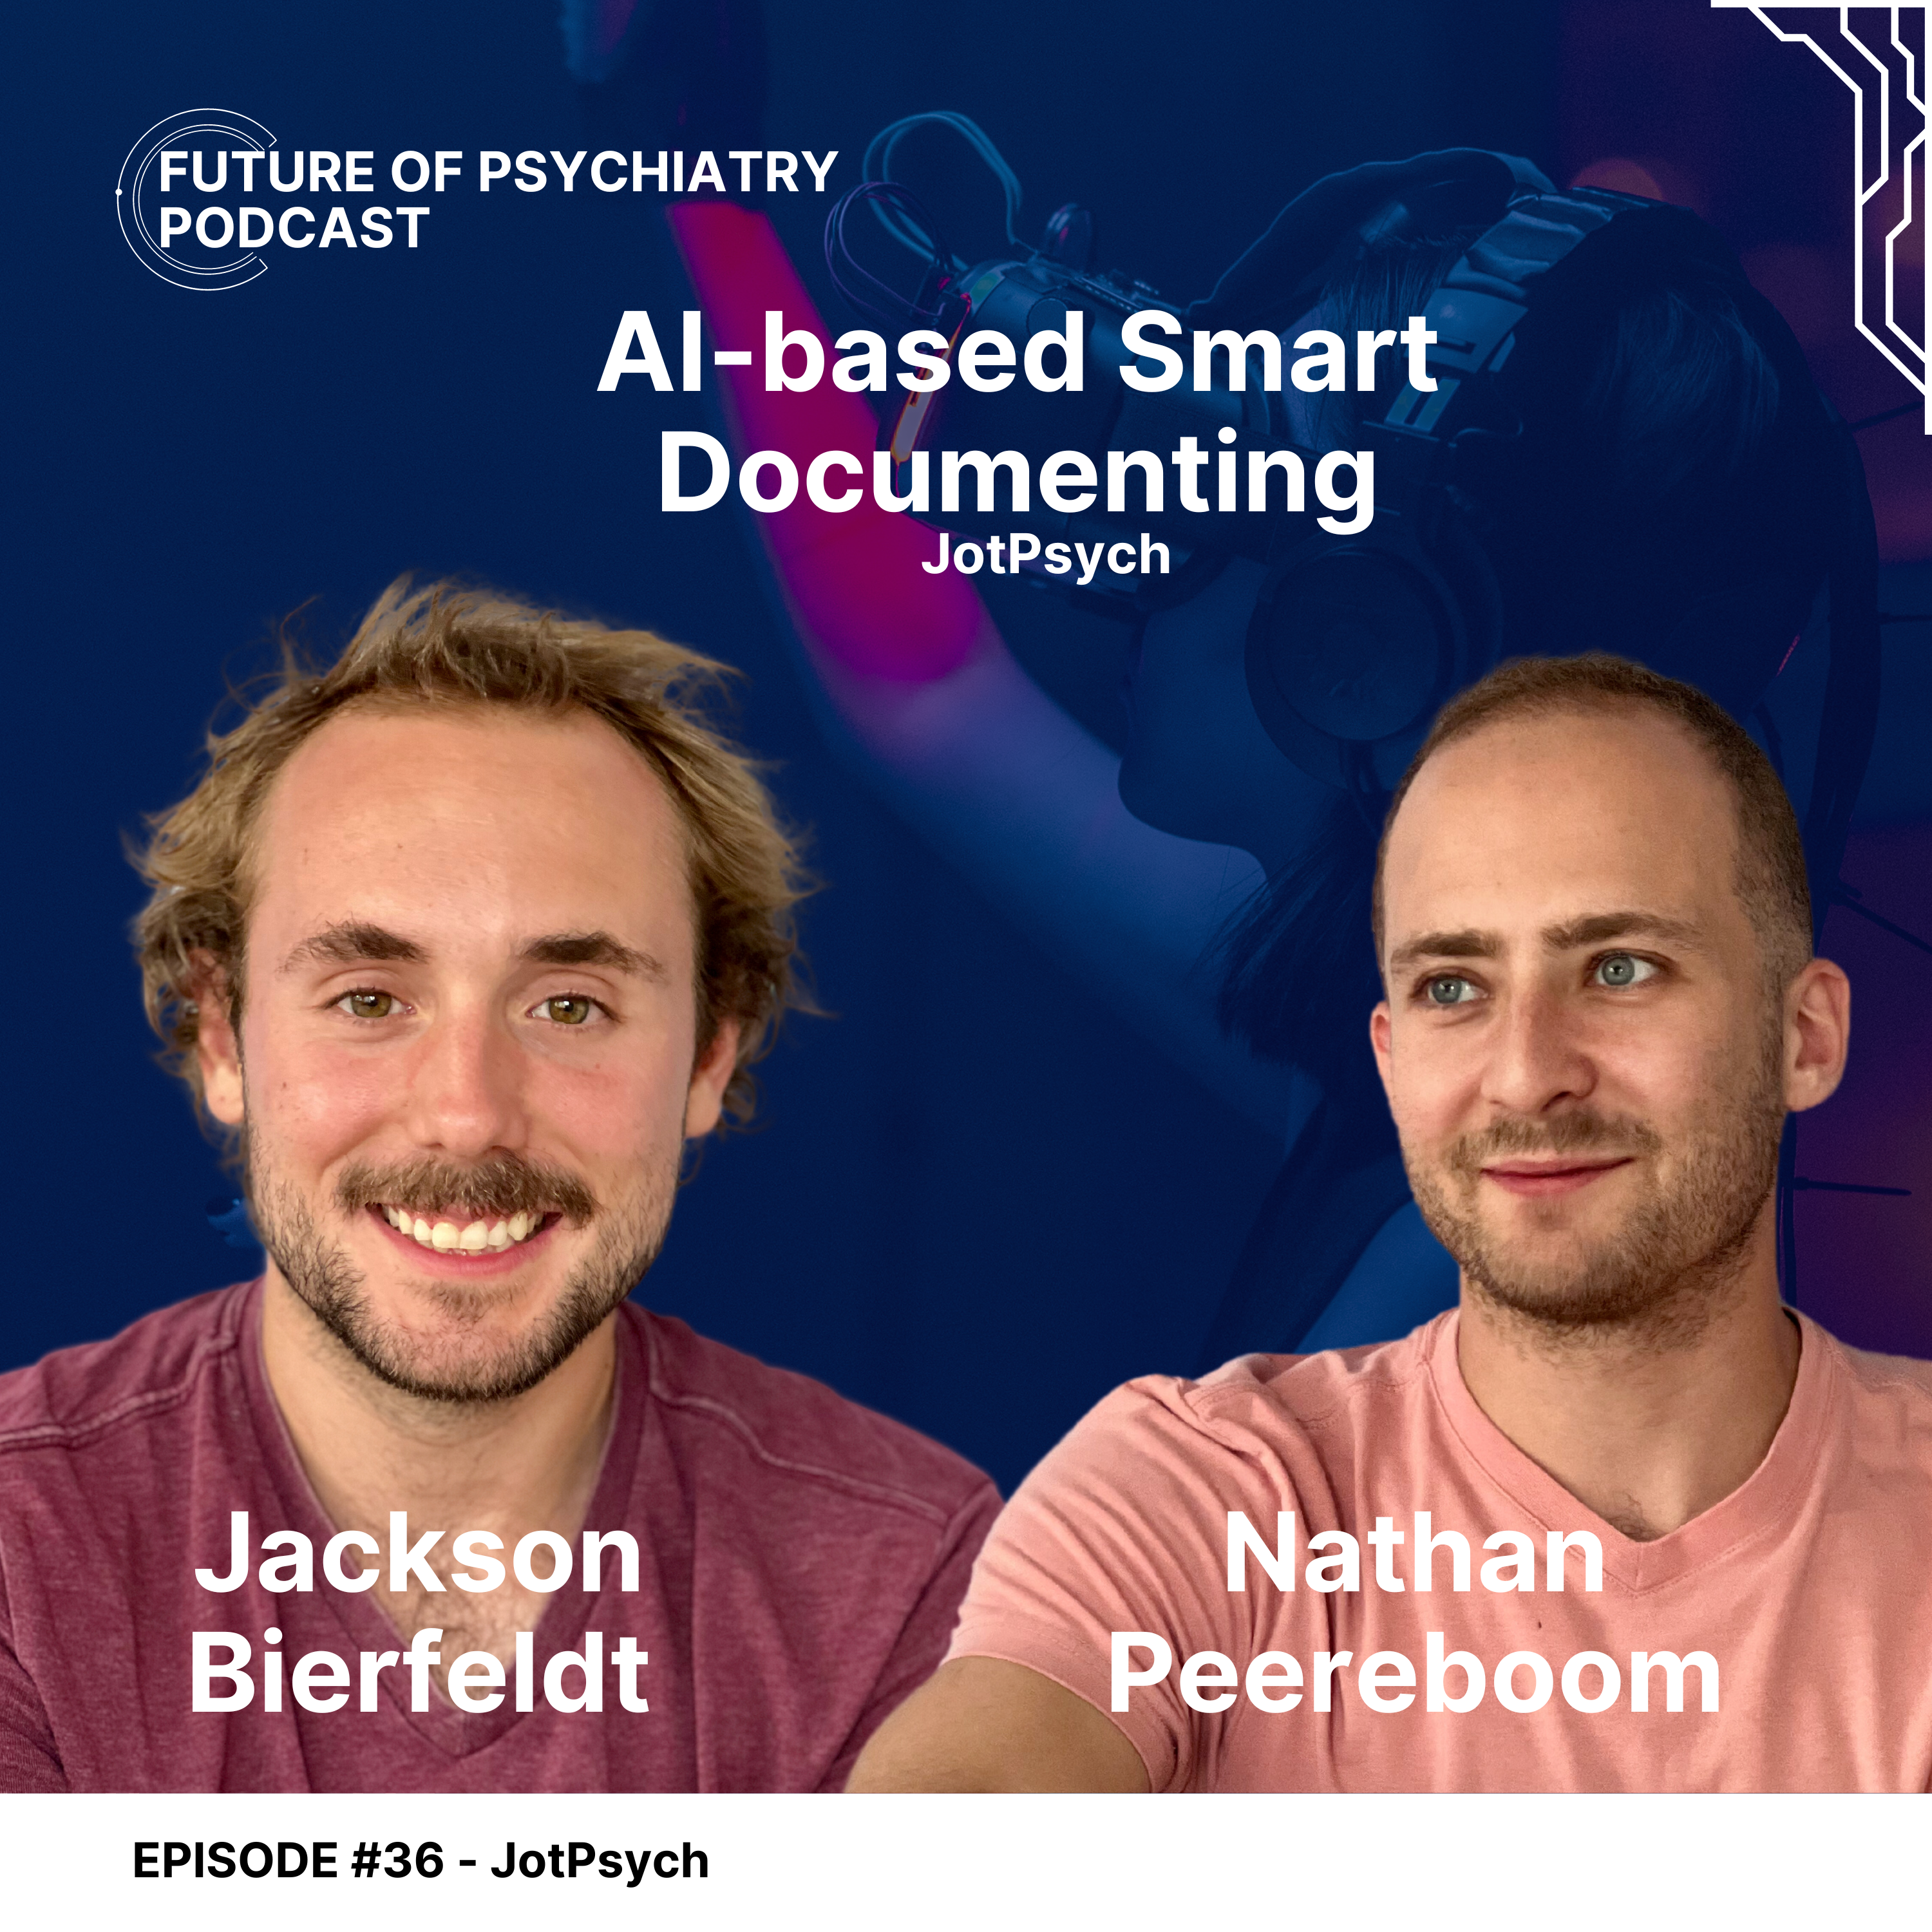 AI-based Smart Documenting with JotPsych